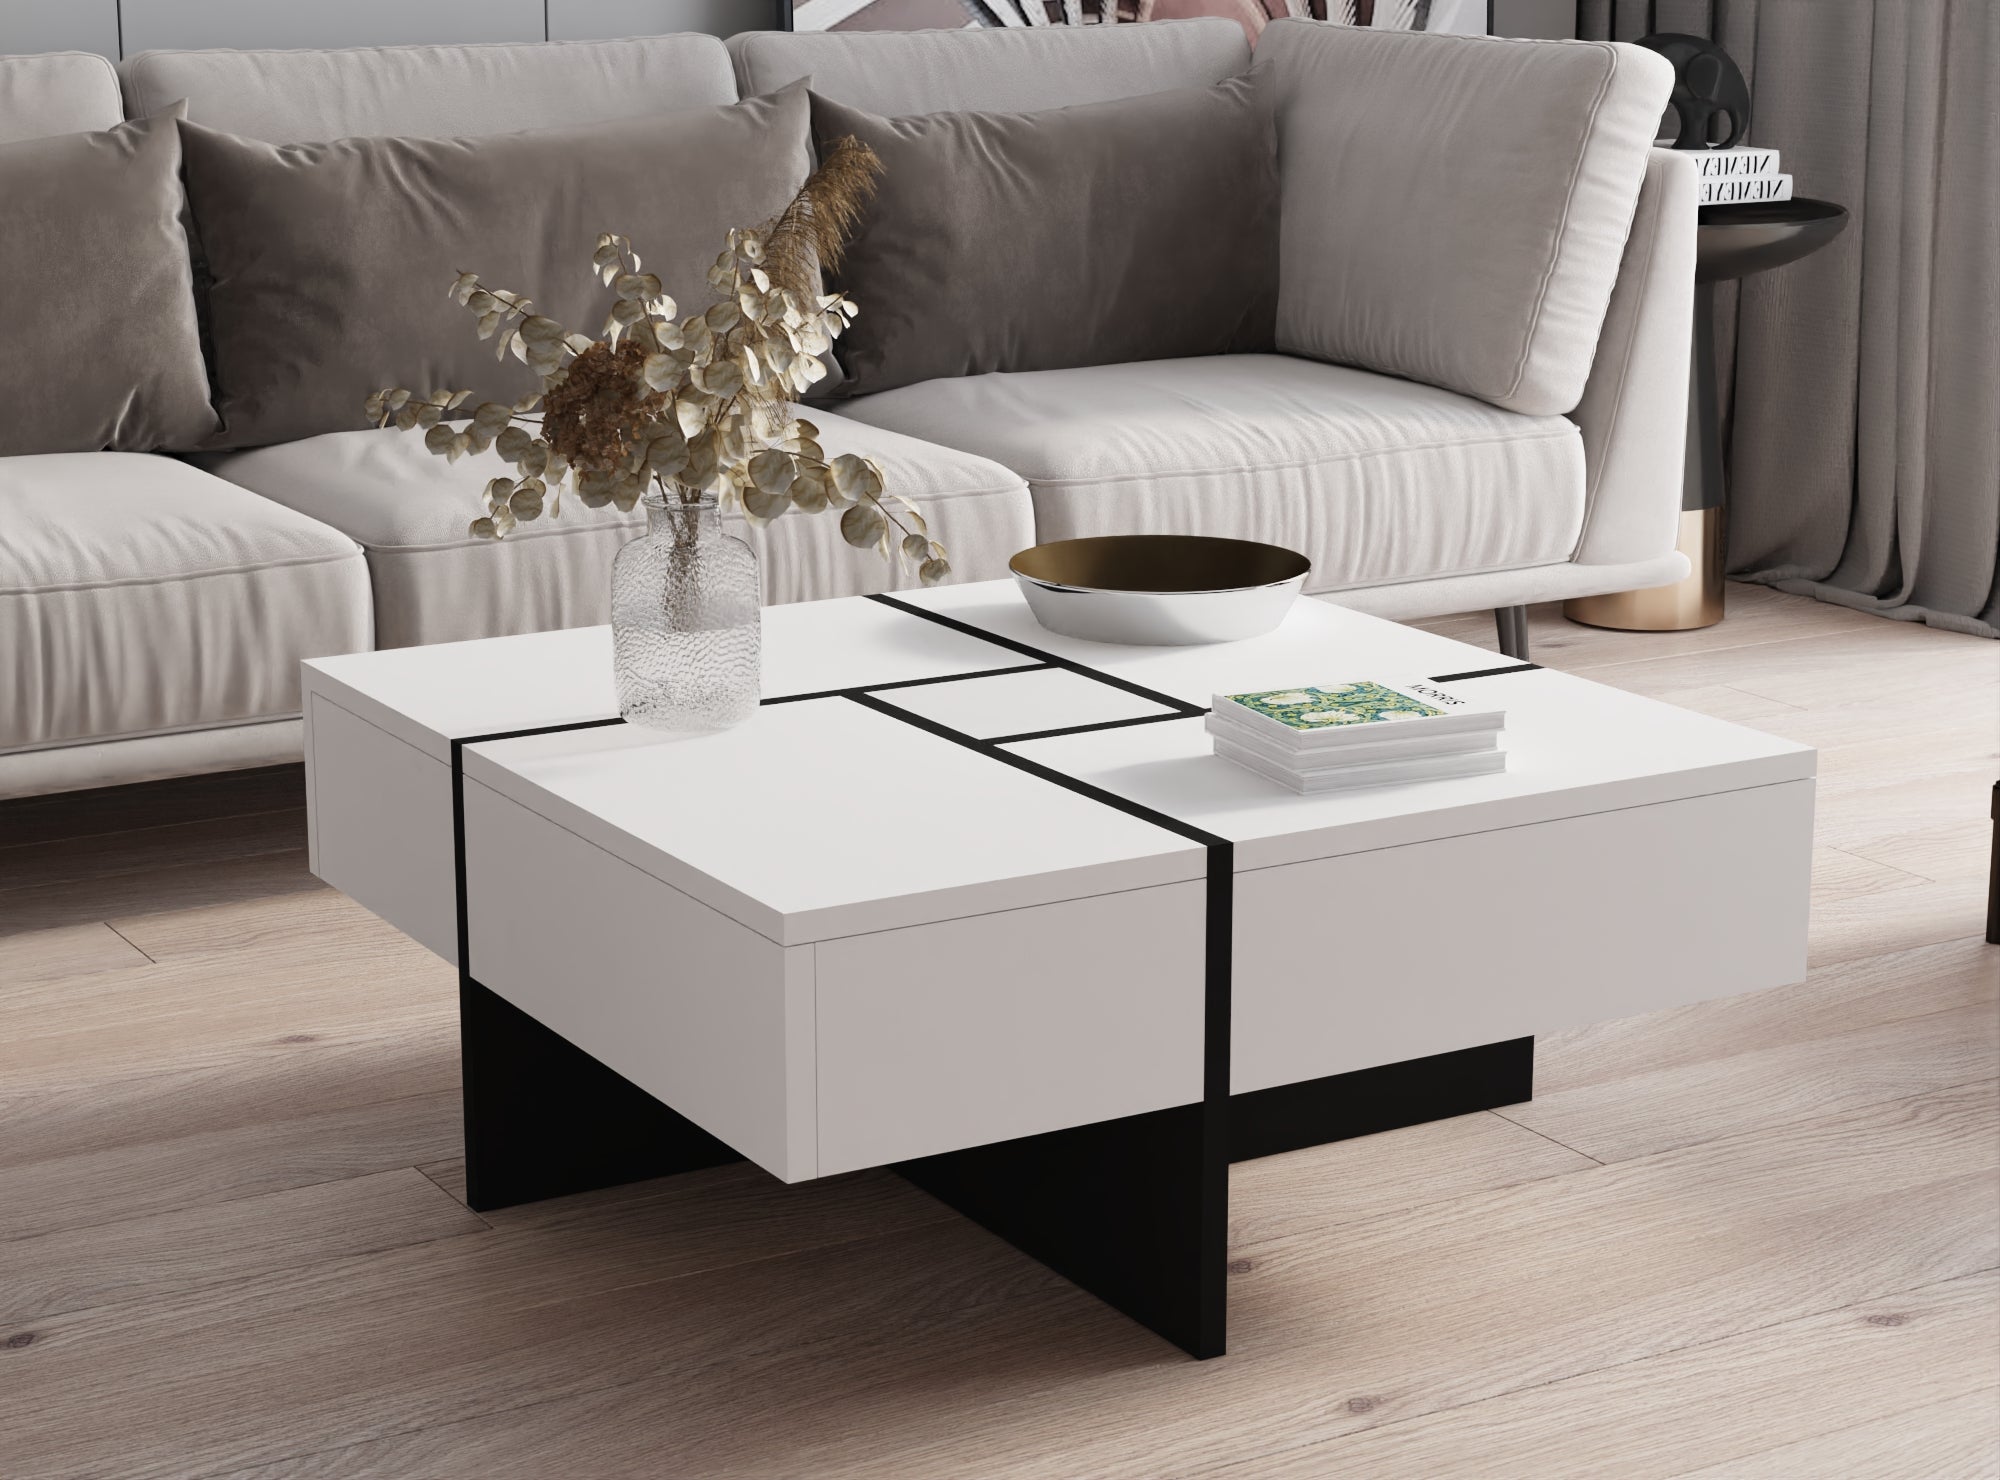 Futuristic White Extendable Coffee Table with Storage